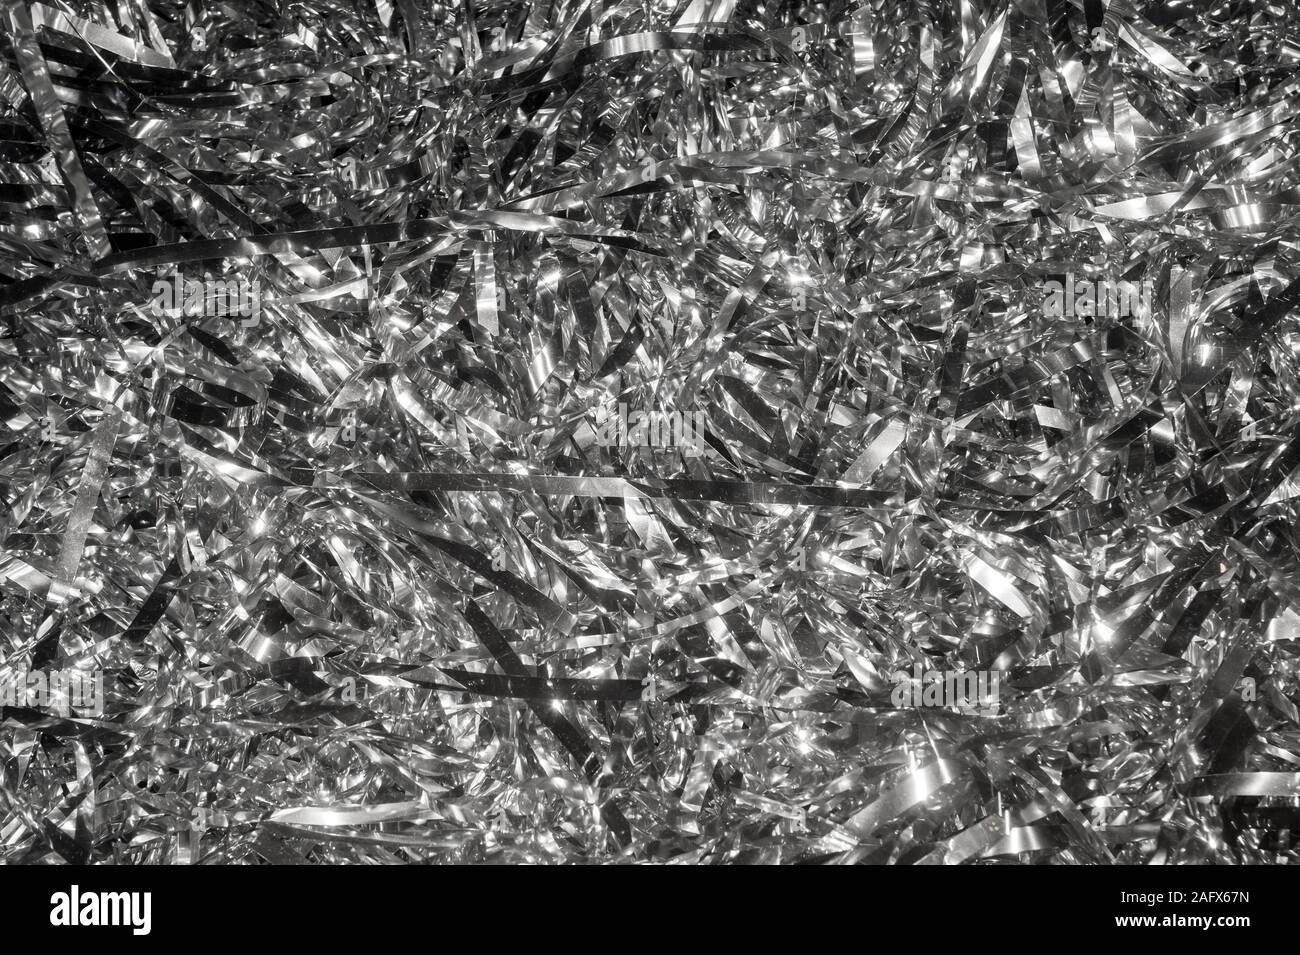 Abstract festive background of a jumble of silver tinsel Stock Photo